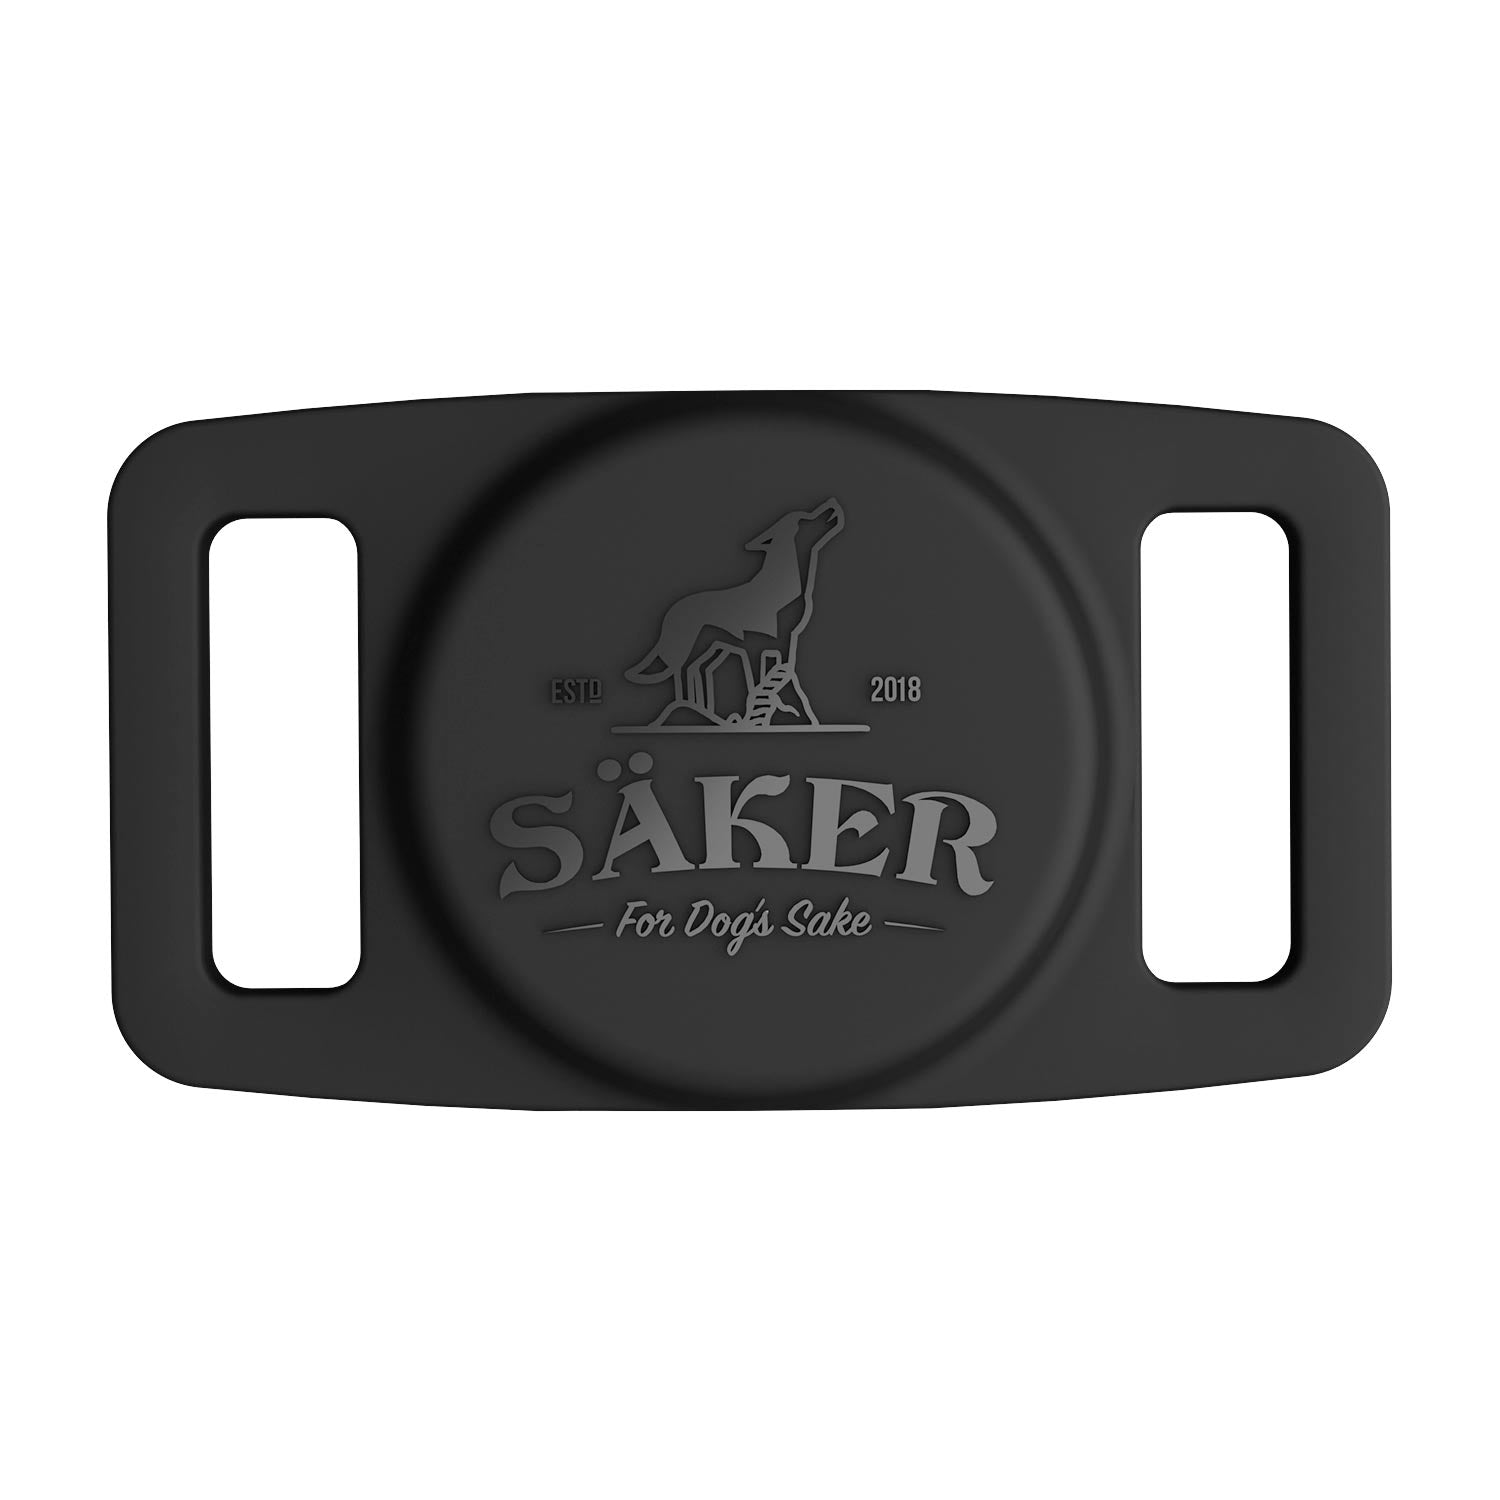 Main image of the Mammoth Airtag Holder in Black